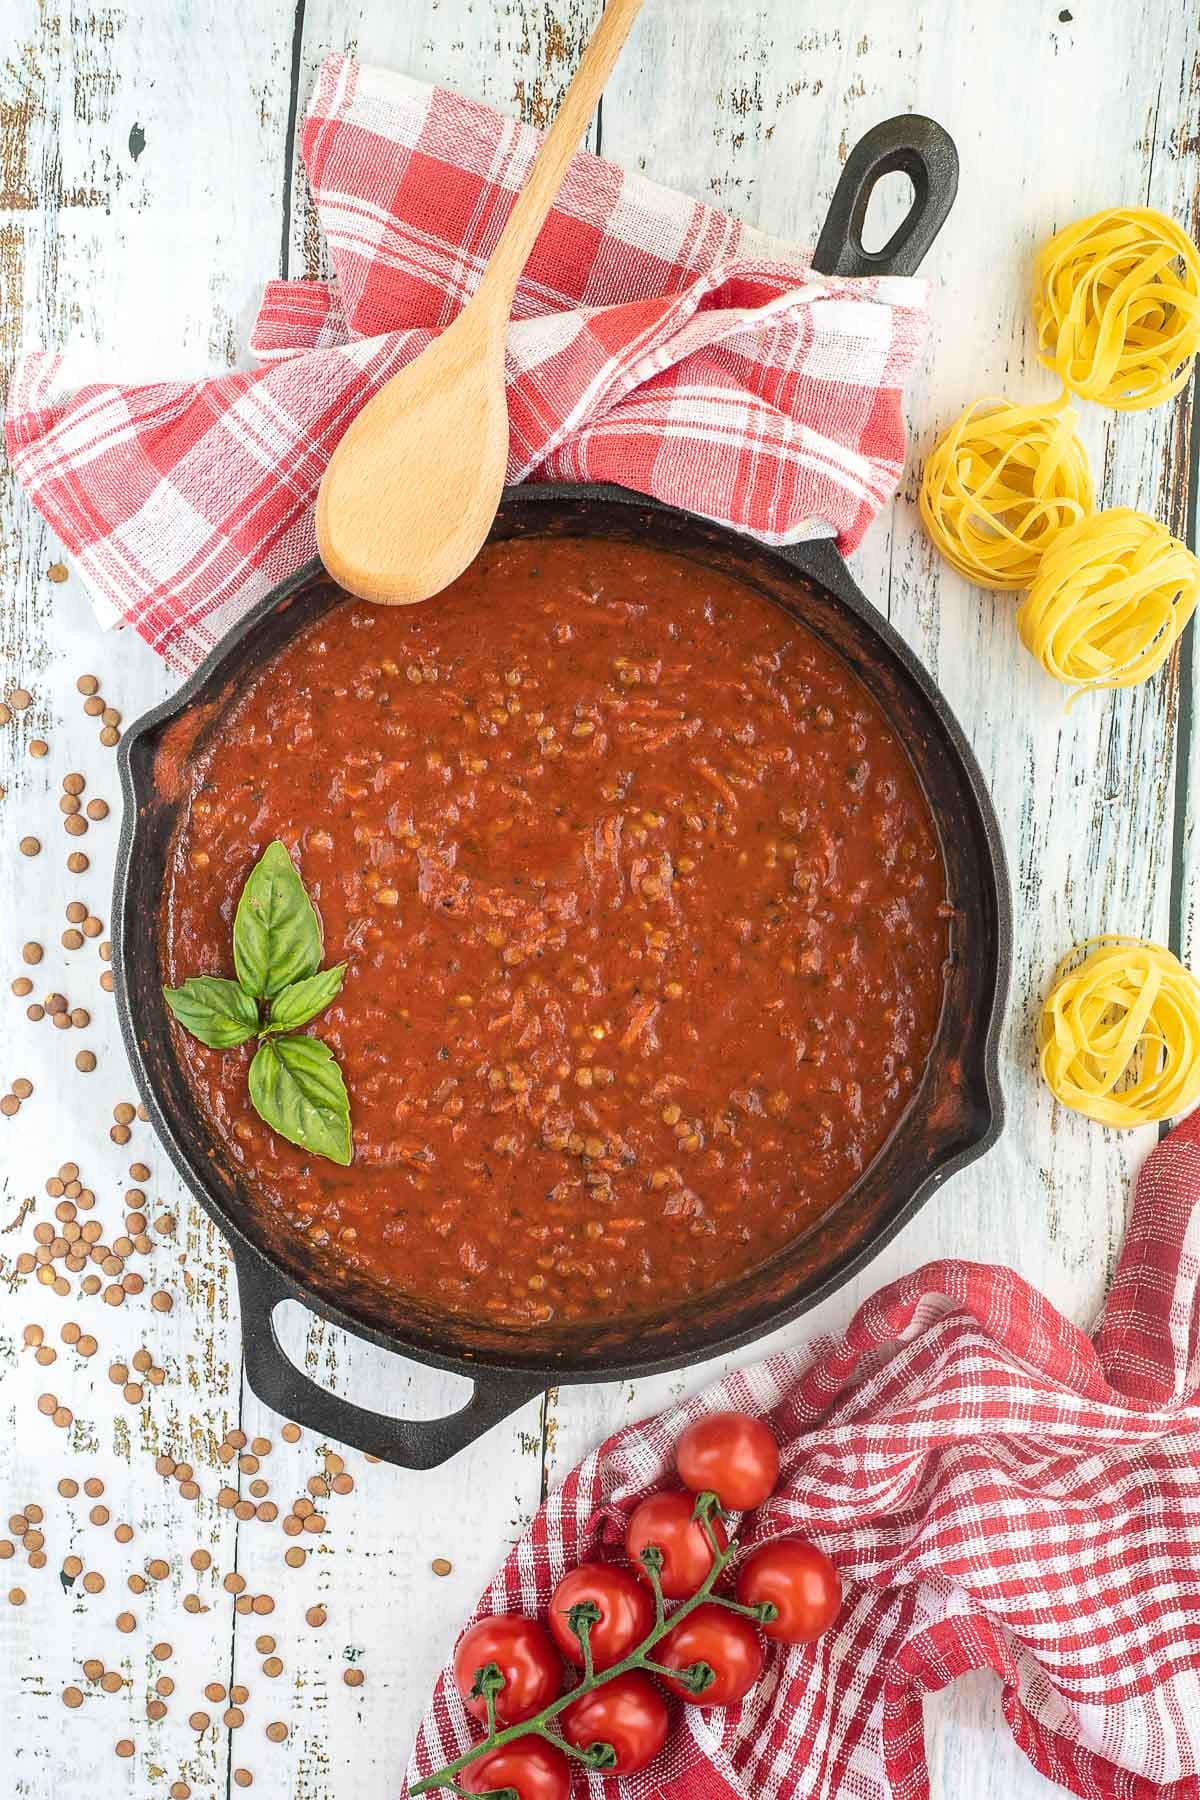 A cast iron skillet with brown lentils in bolognese sauce. Dry lentils, dry pasta and some cherry tomatoes are scattered around the skillet. A wooden spatula is placed on the side.